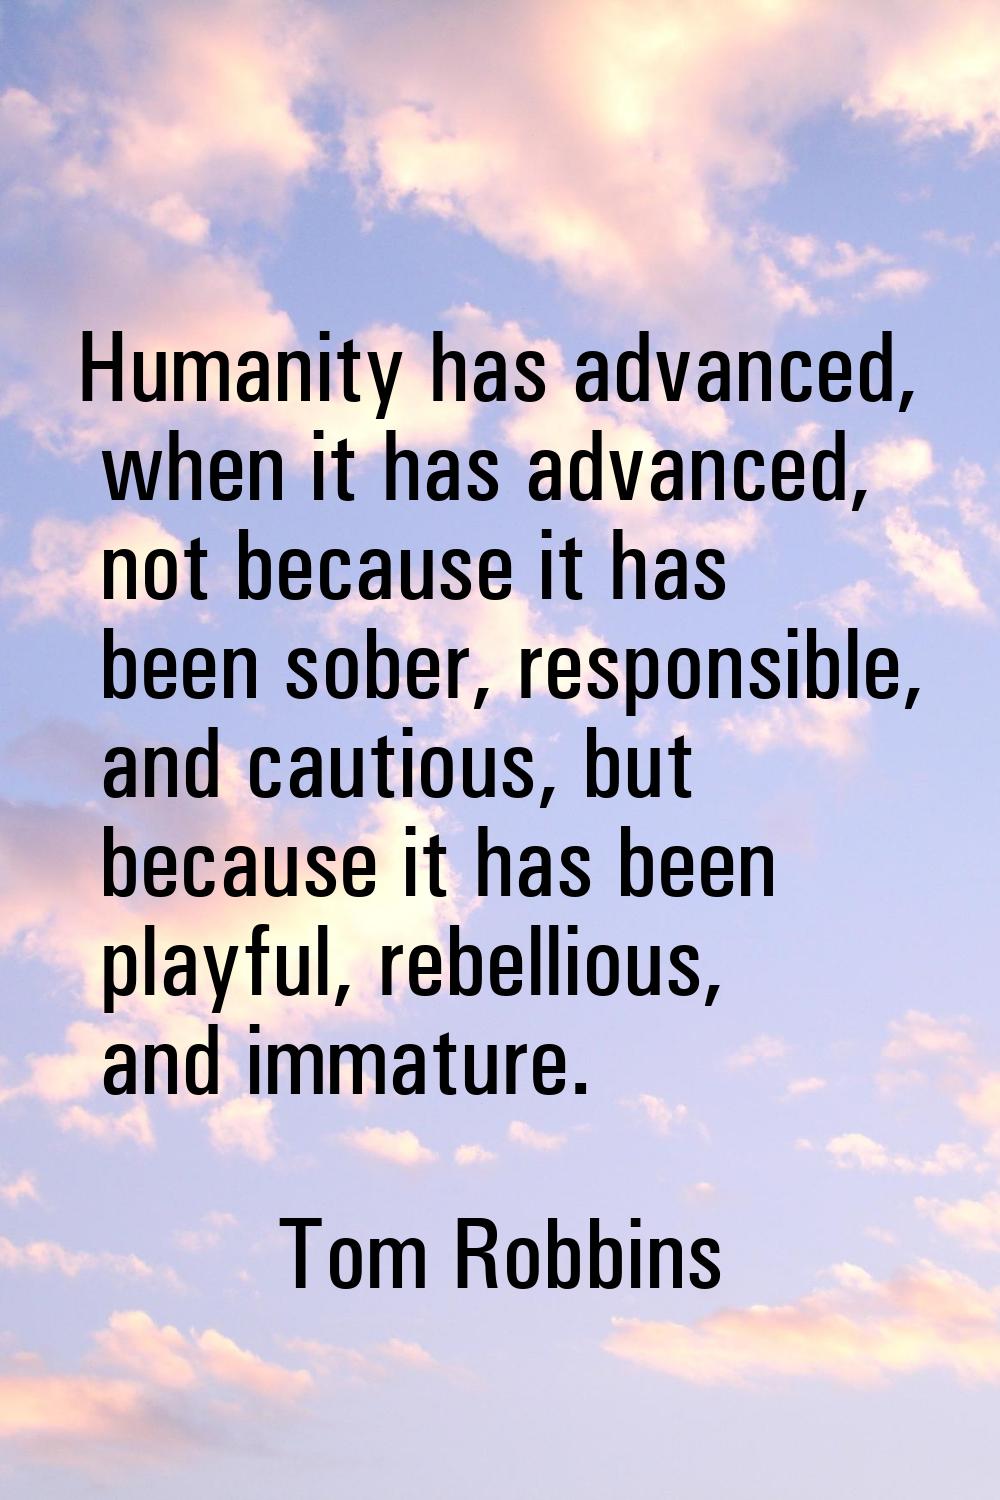 Humanity has advanced, when it has advanced, not because it has been sober, responsible, and cautio